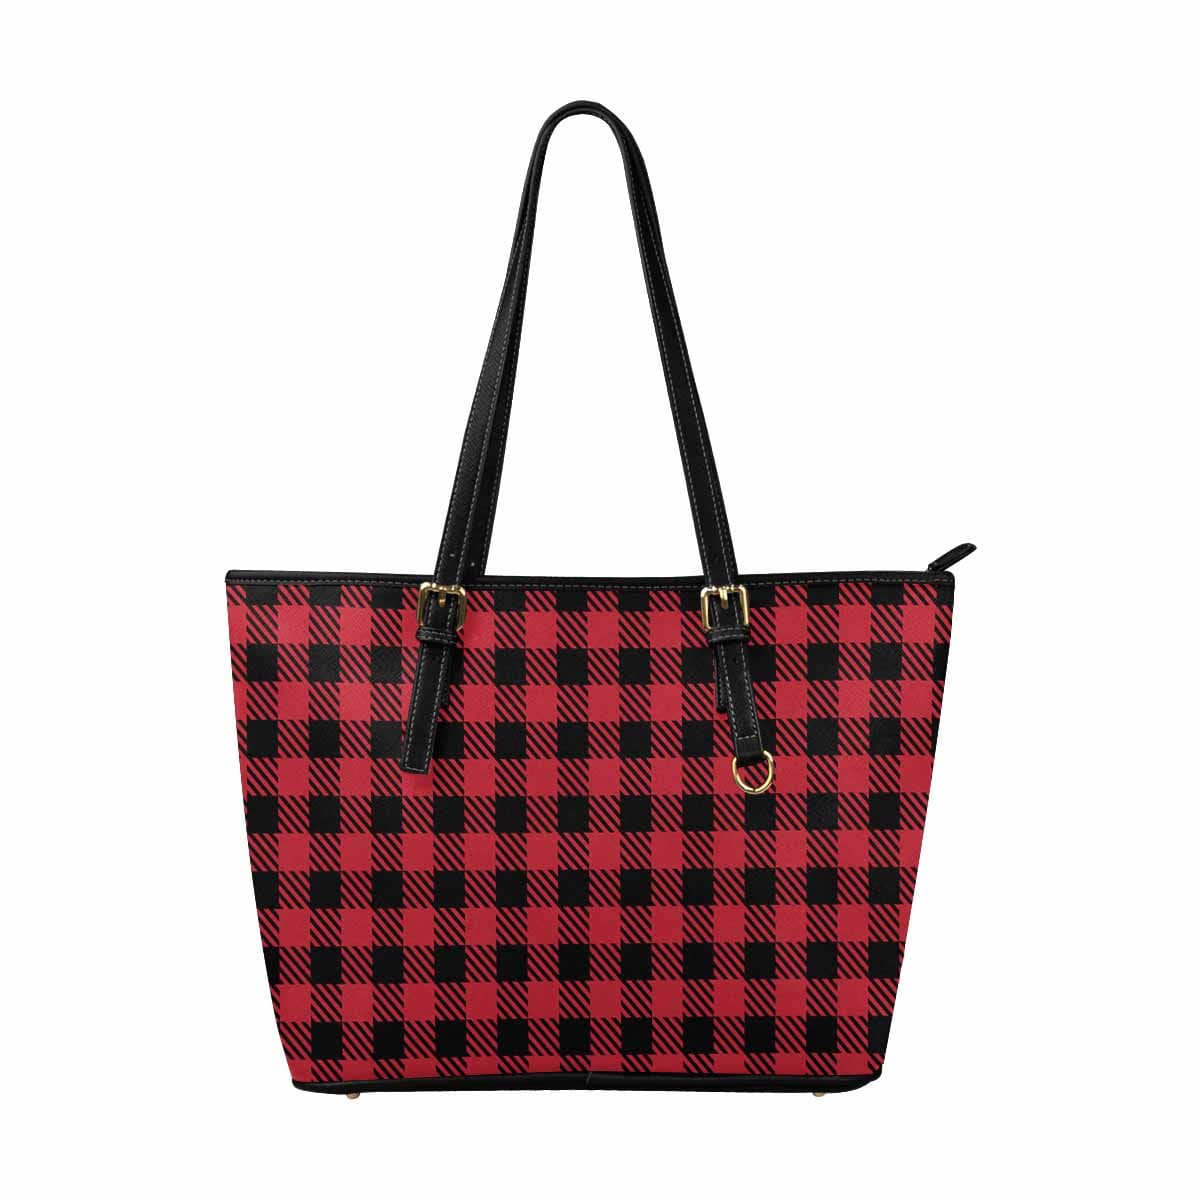 Large Leather Tote Shoulder Bag - Buffalo Plaid Red And Black S954659 - Bags